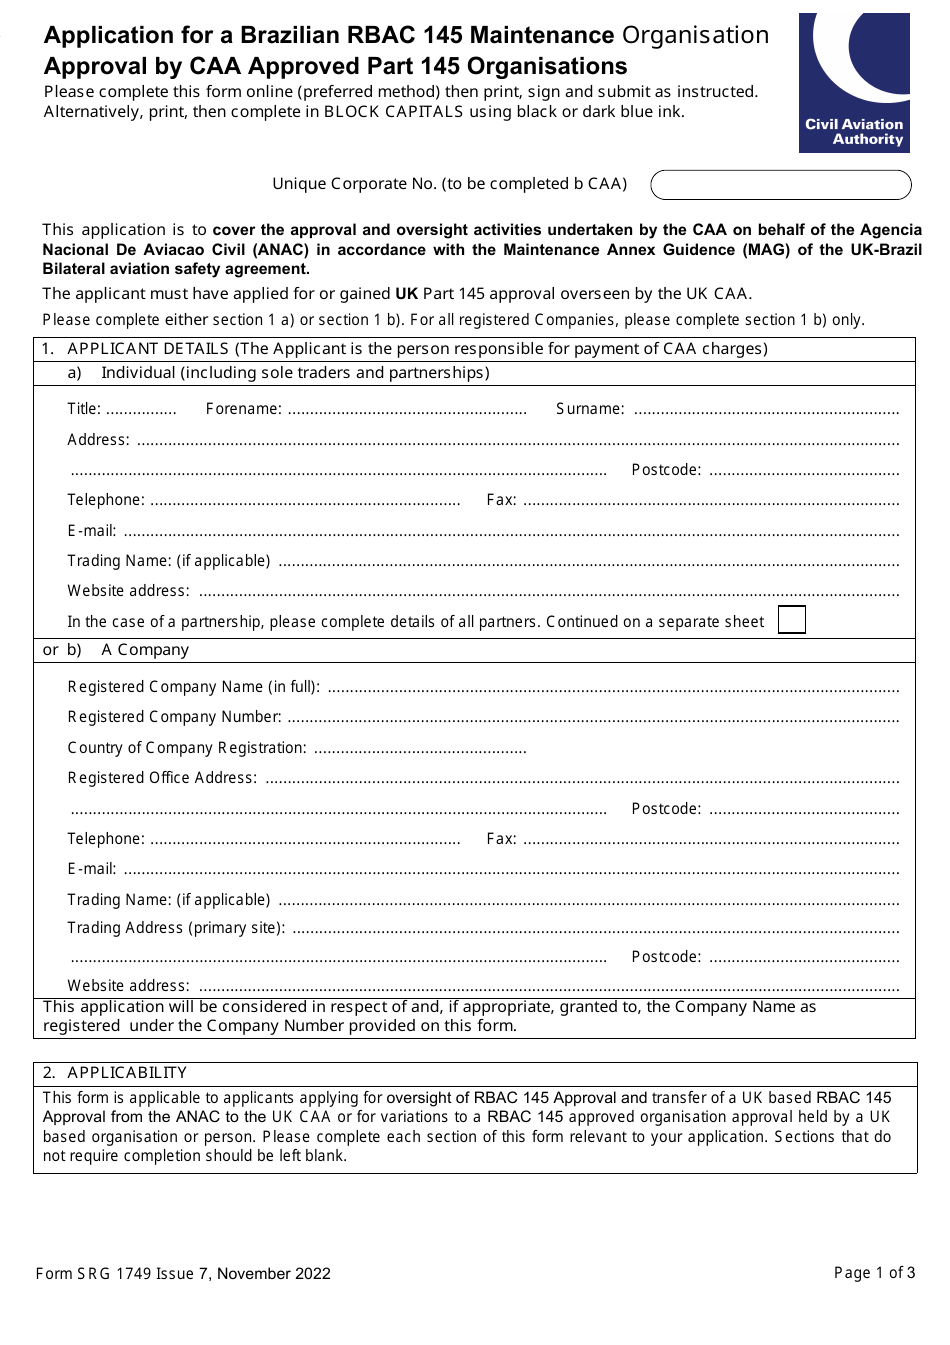 Form SRG1749 Application for a Brazilian Rbac 145 Maintenance Organisation Approval by Caa Approved Part 145 Organisations - United Kingdom, Page 1